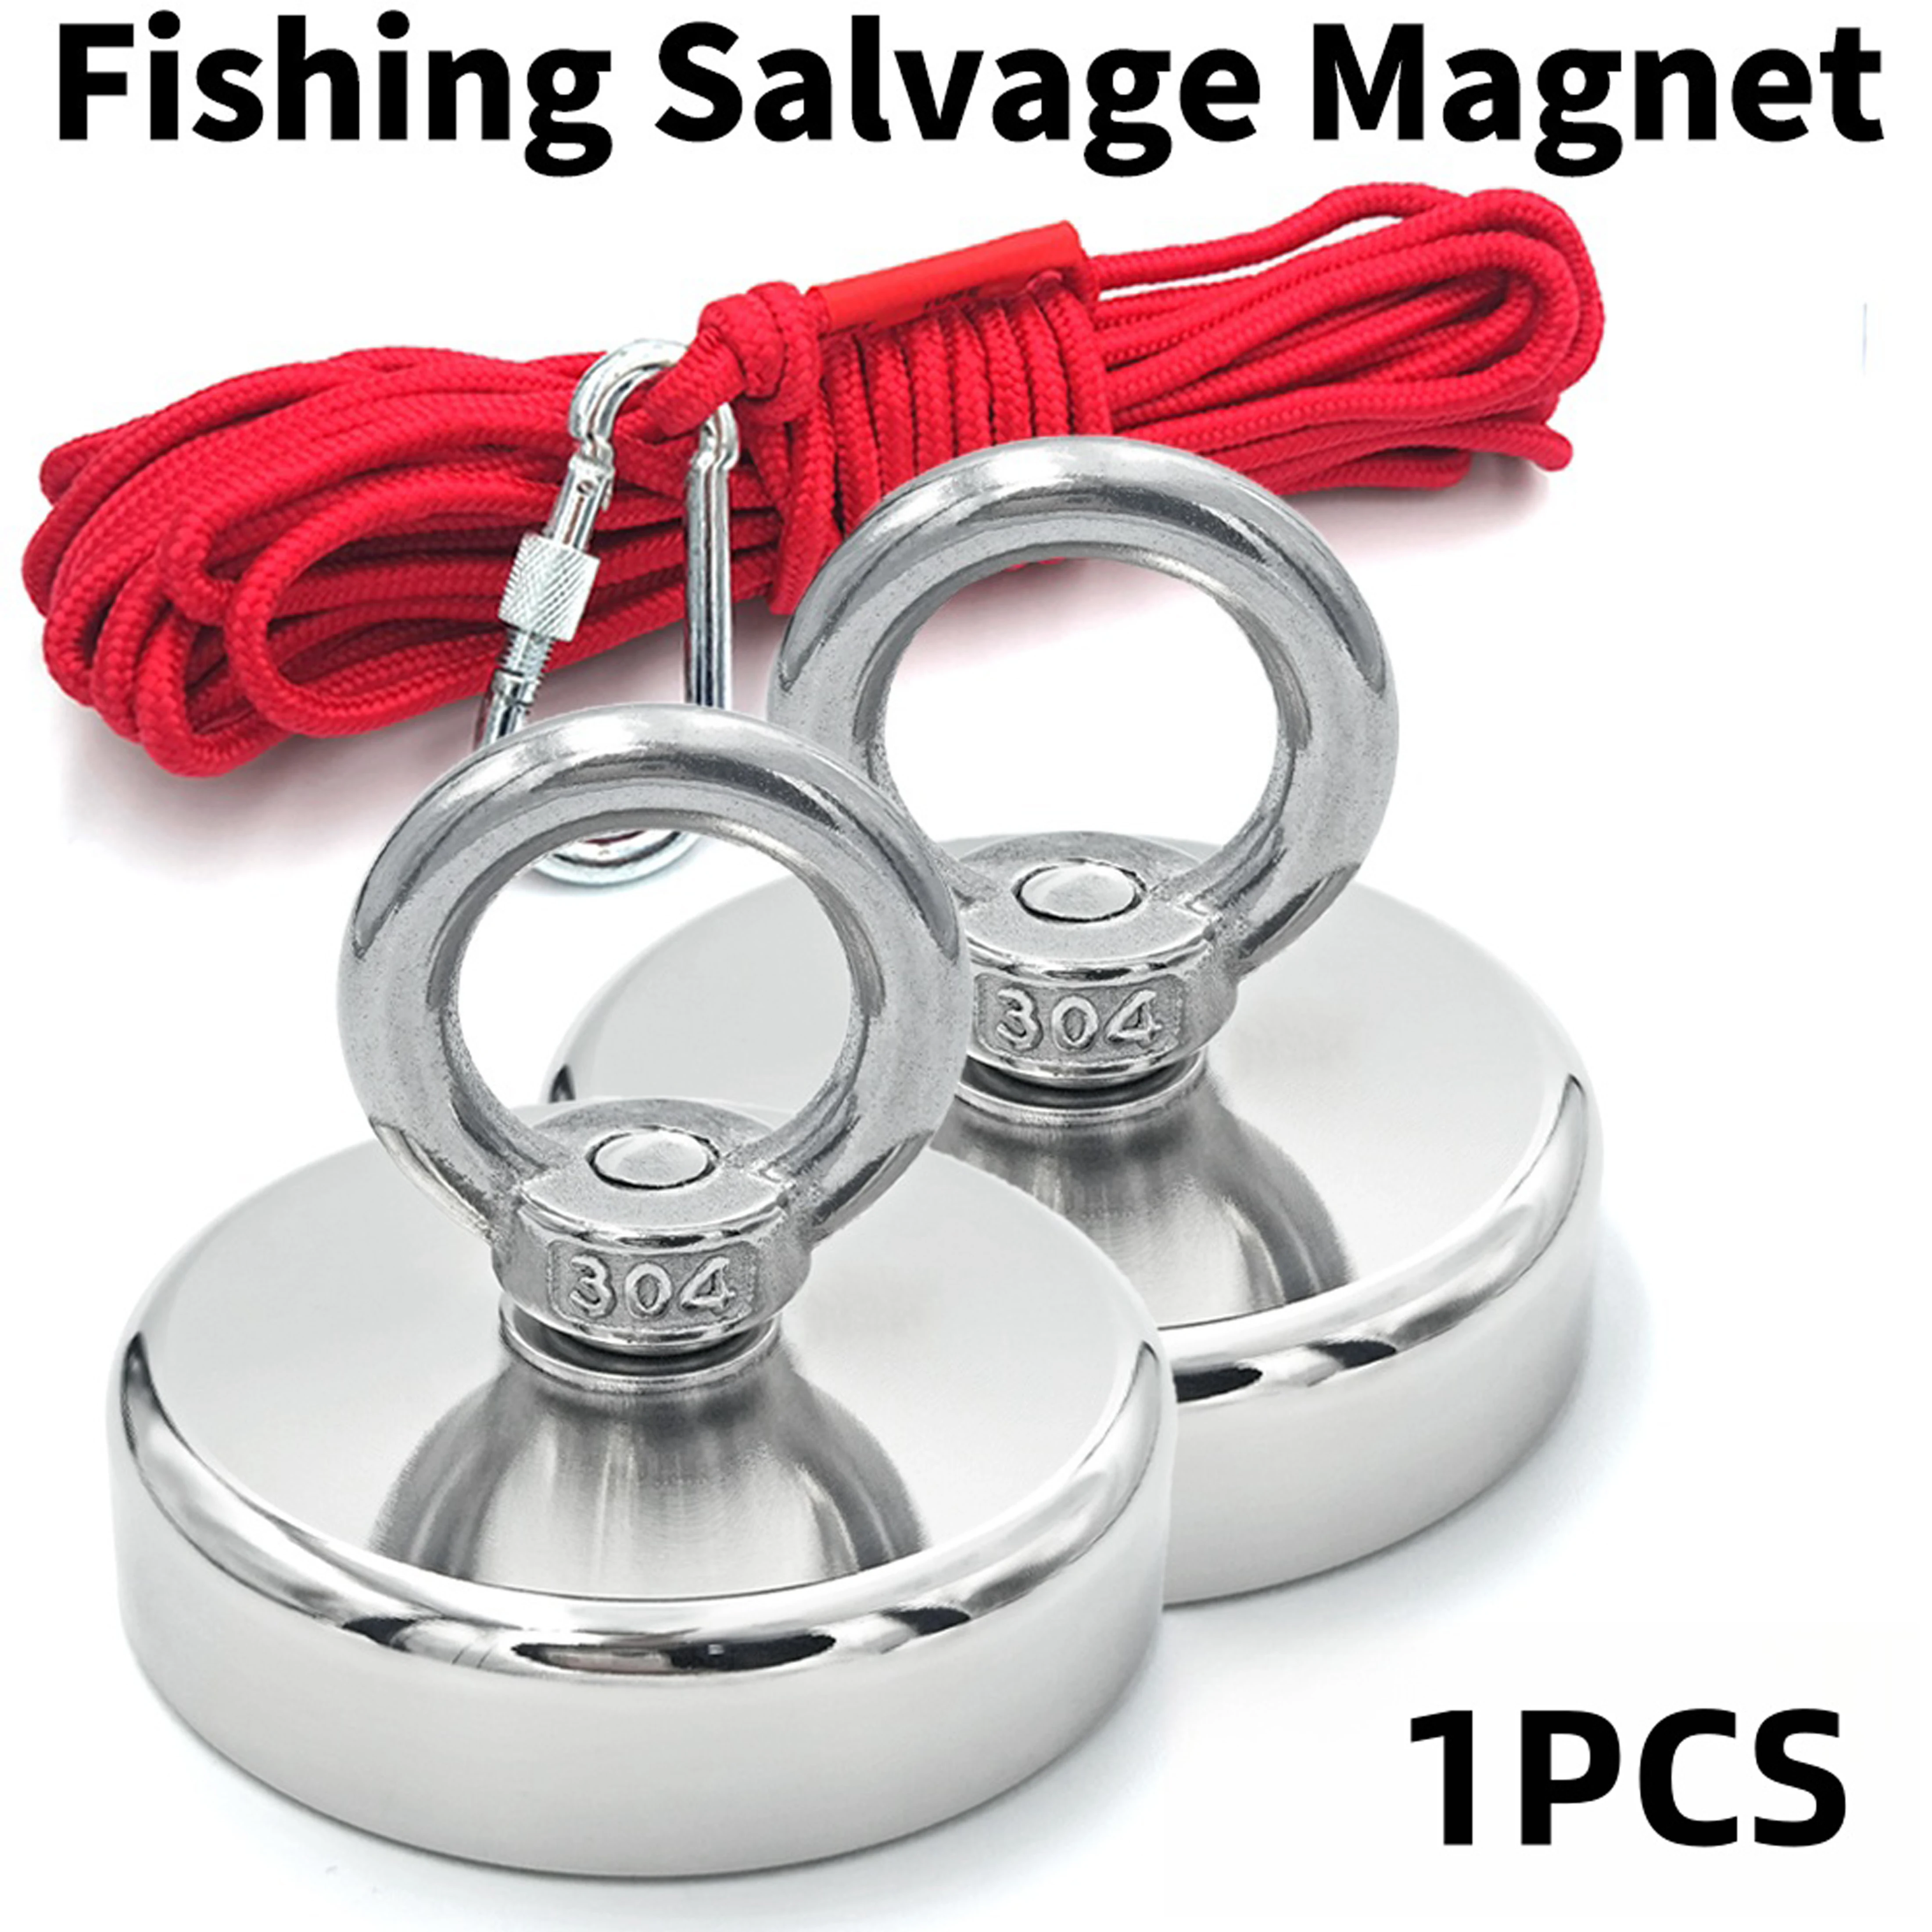 

1PCS Super Strong Neodymium Magnet Set Heavy Duty Fishing Magnetic Hooks Kit with Countersunk Eyebolt Salvage Finder Magnets